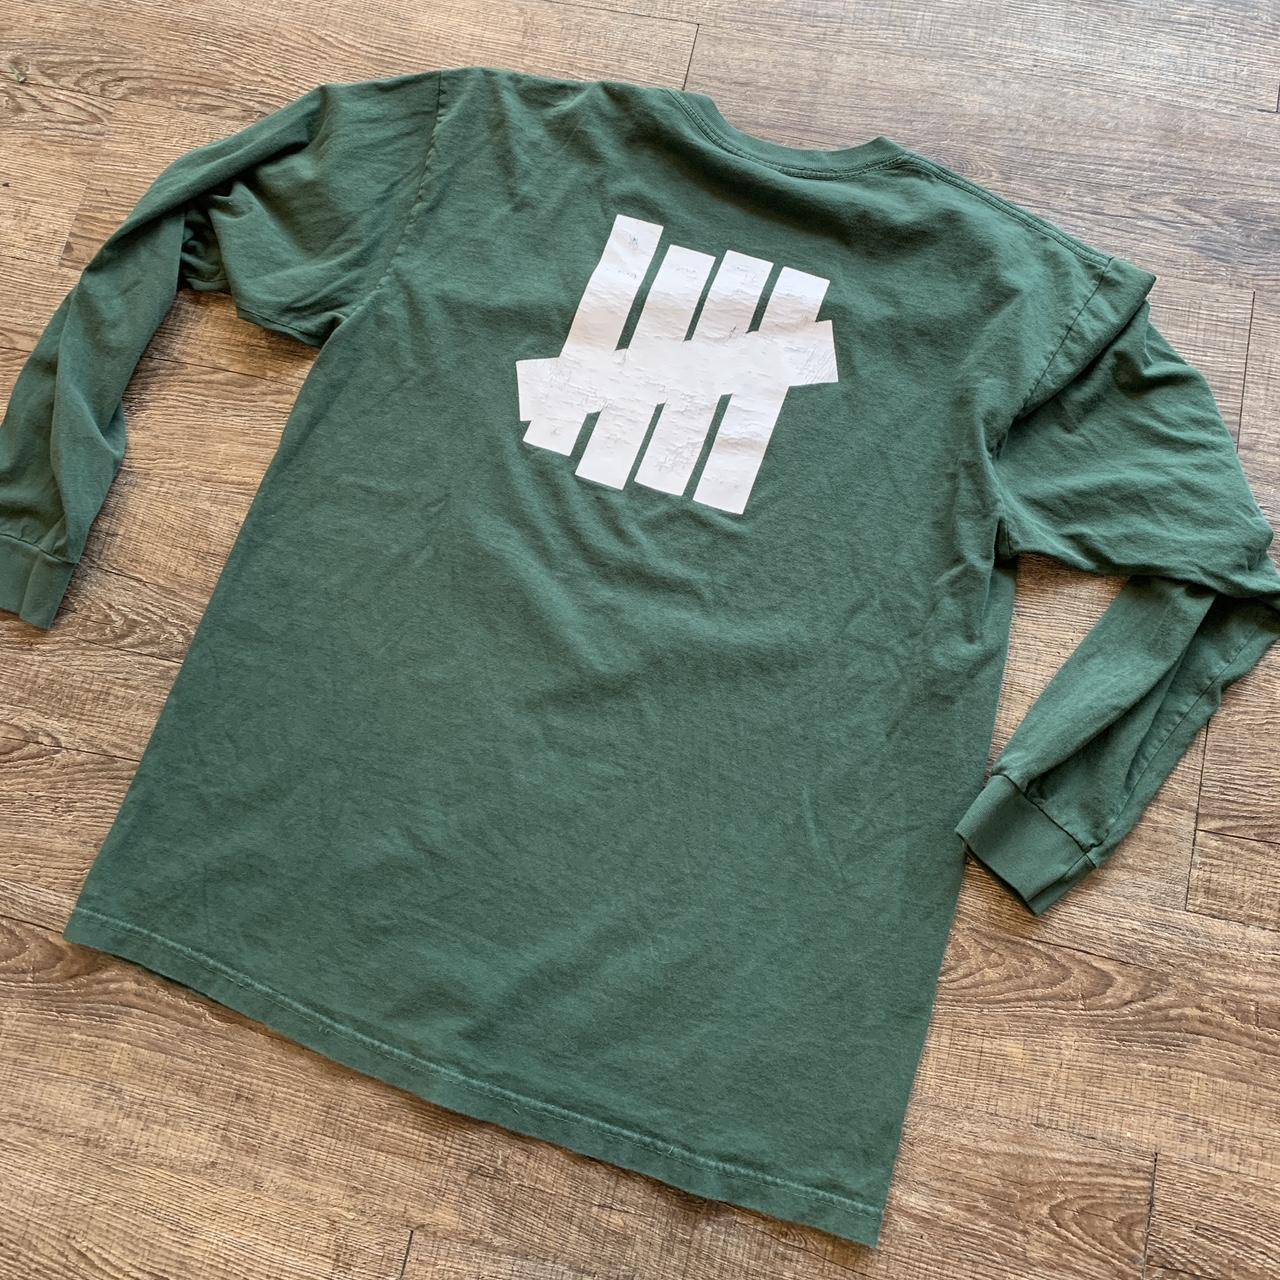 Undefeated Men's Green and White T-shirt (3)